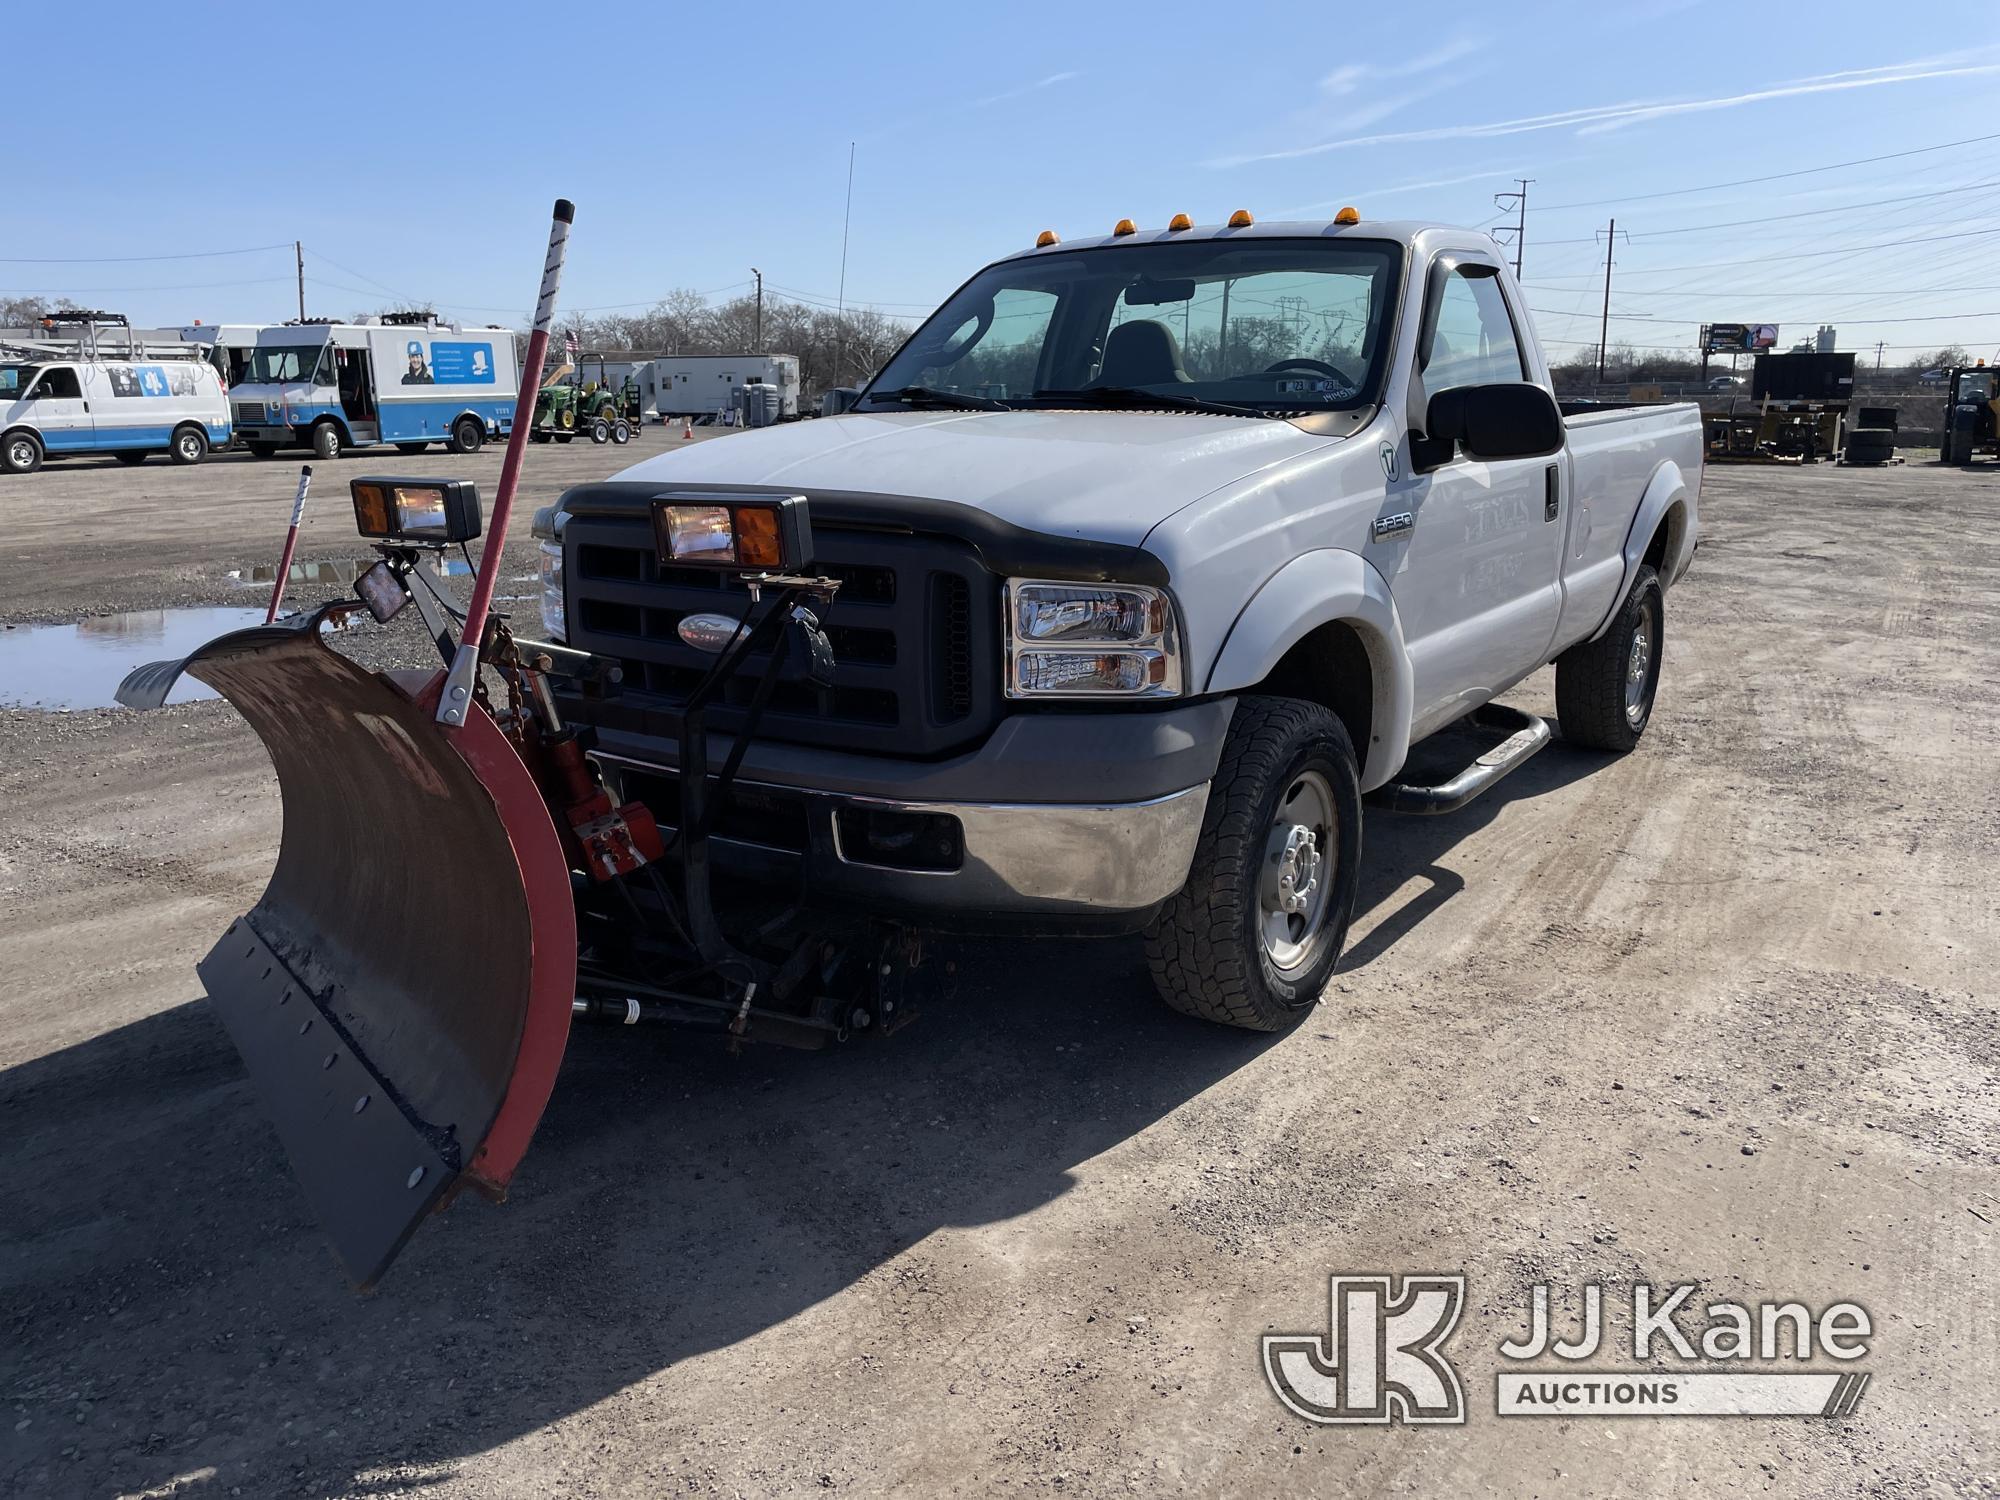 (Plymouth Meeting, PA) 2005 Ford F250 4x4 Pickup Truck Runs & Moves, Abs Light on, Body Rust Damage,